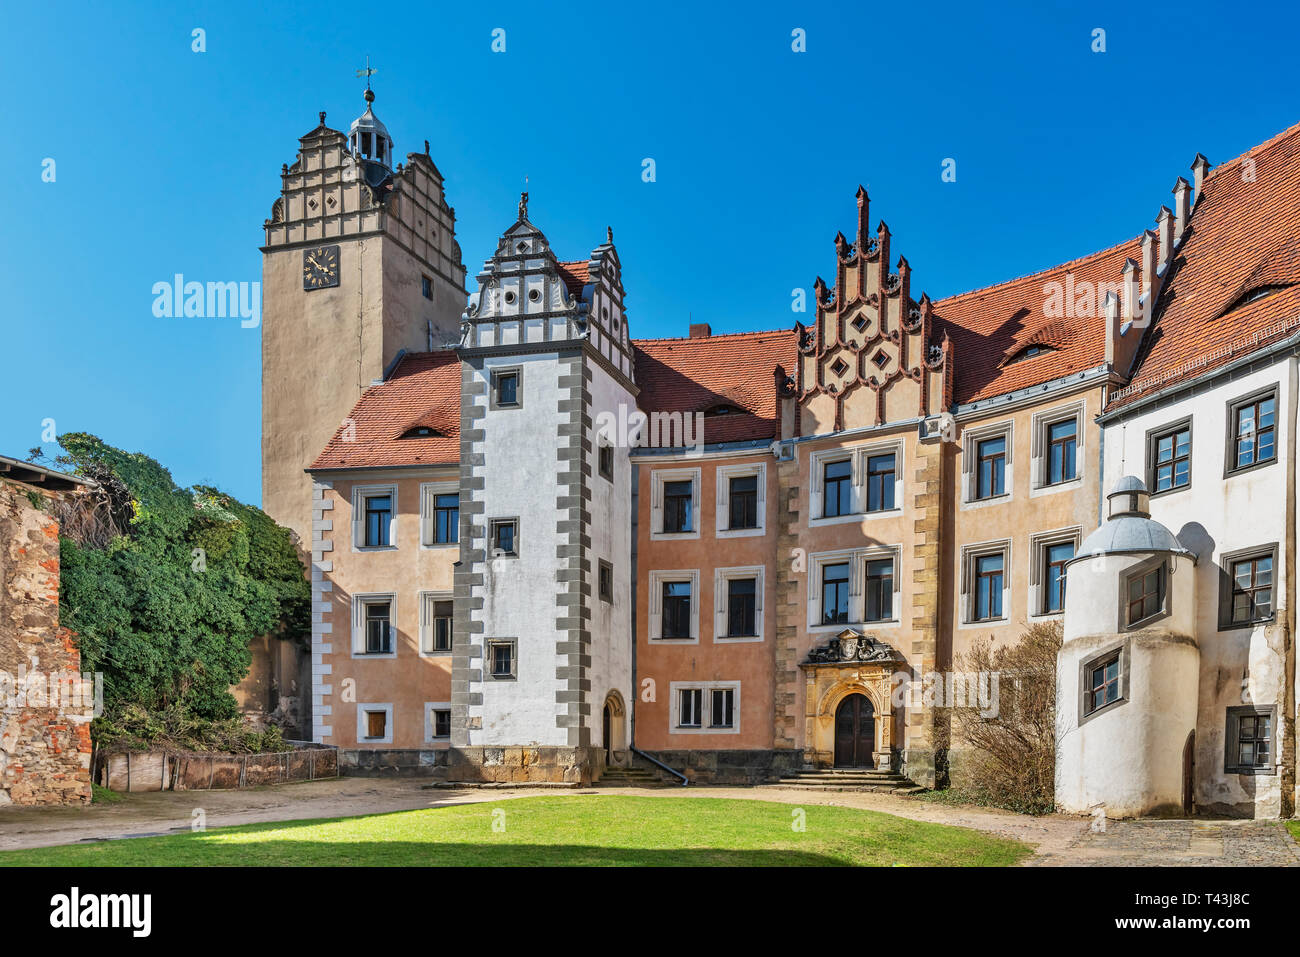 The Castle Strehla is a castle in the town Strehla, administrative district Meissen, Saxony, Germany, Europe Stock Photo